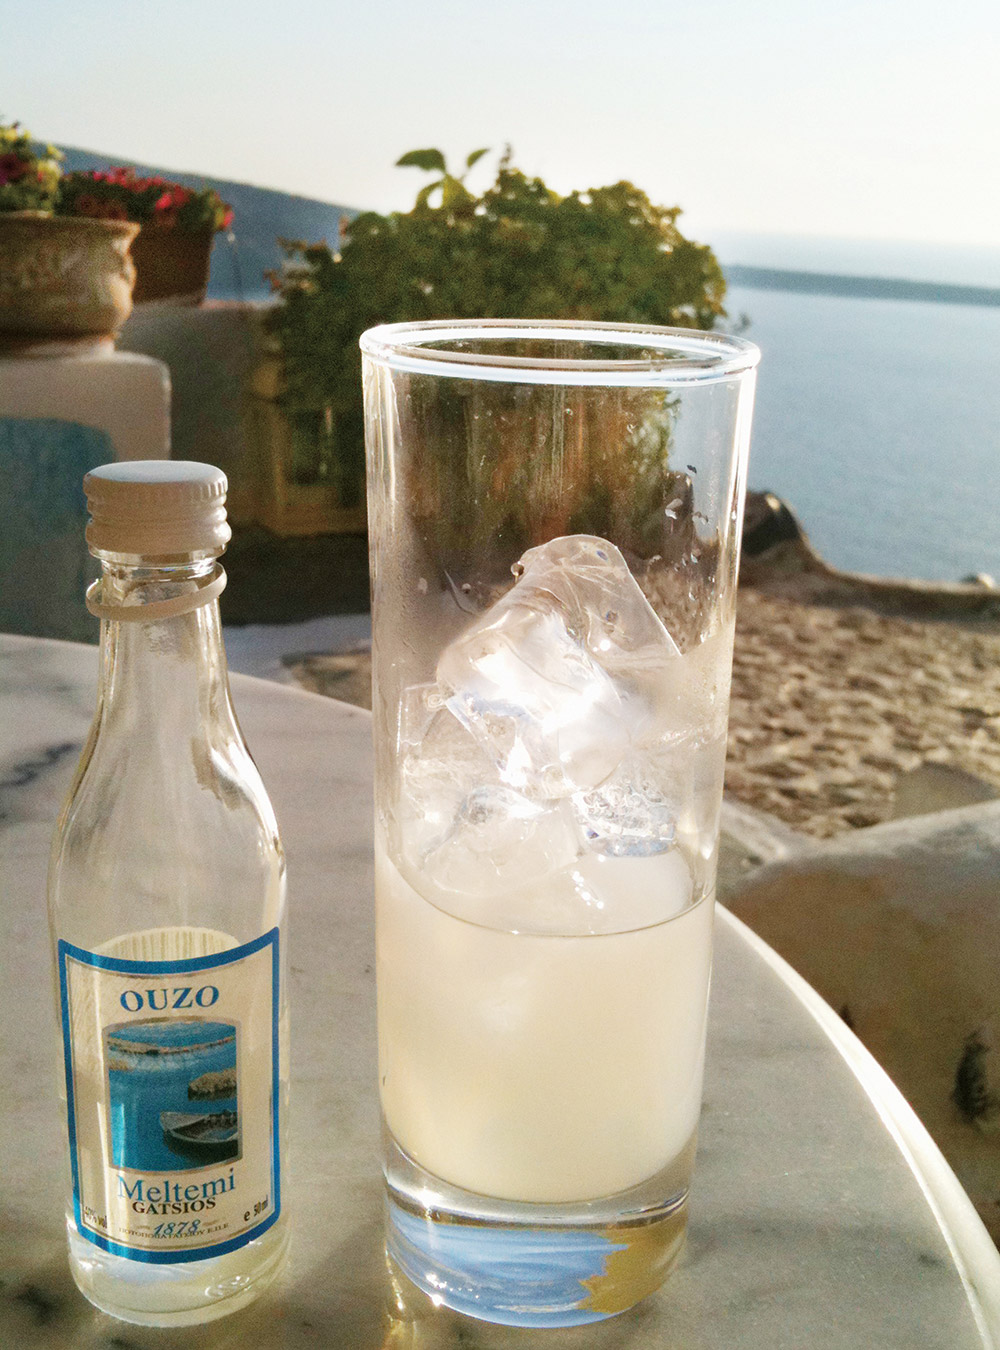 Fromage à l'ouzo